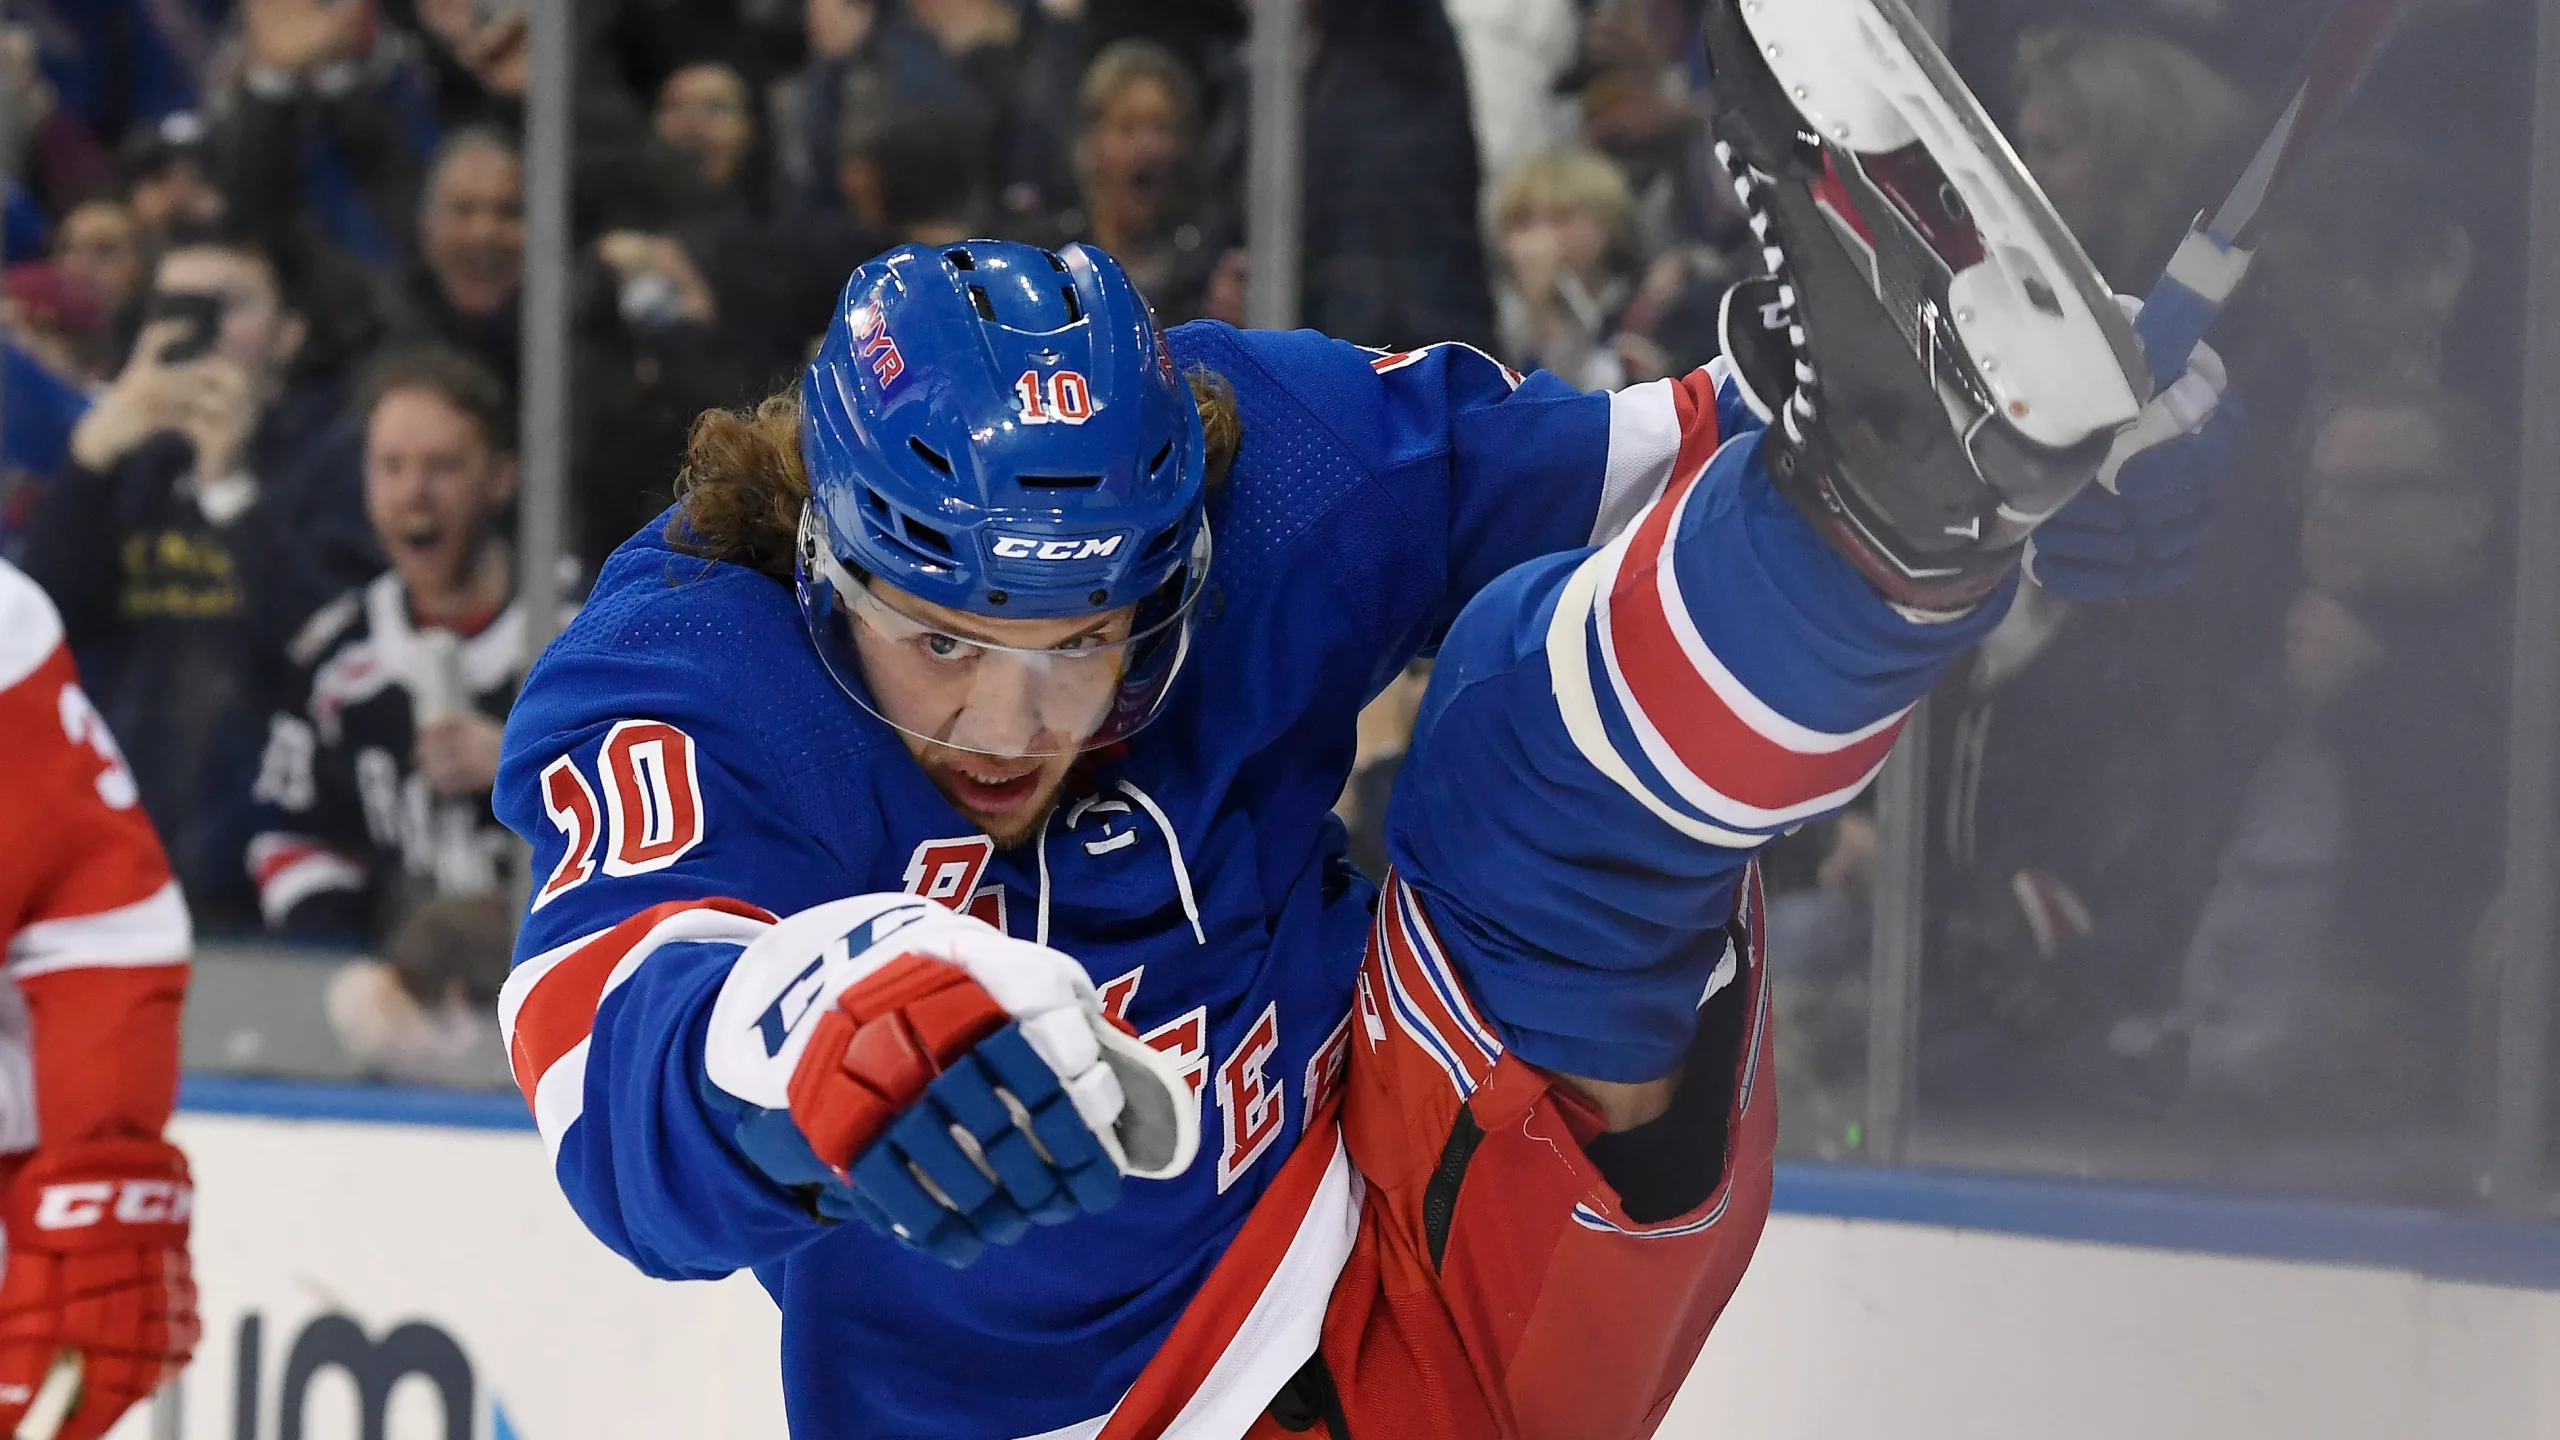 Rangers' Second Line Surges with Panarin's Leadership